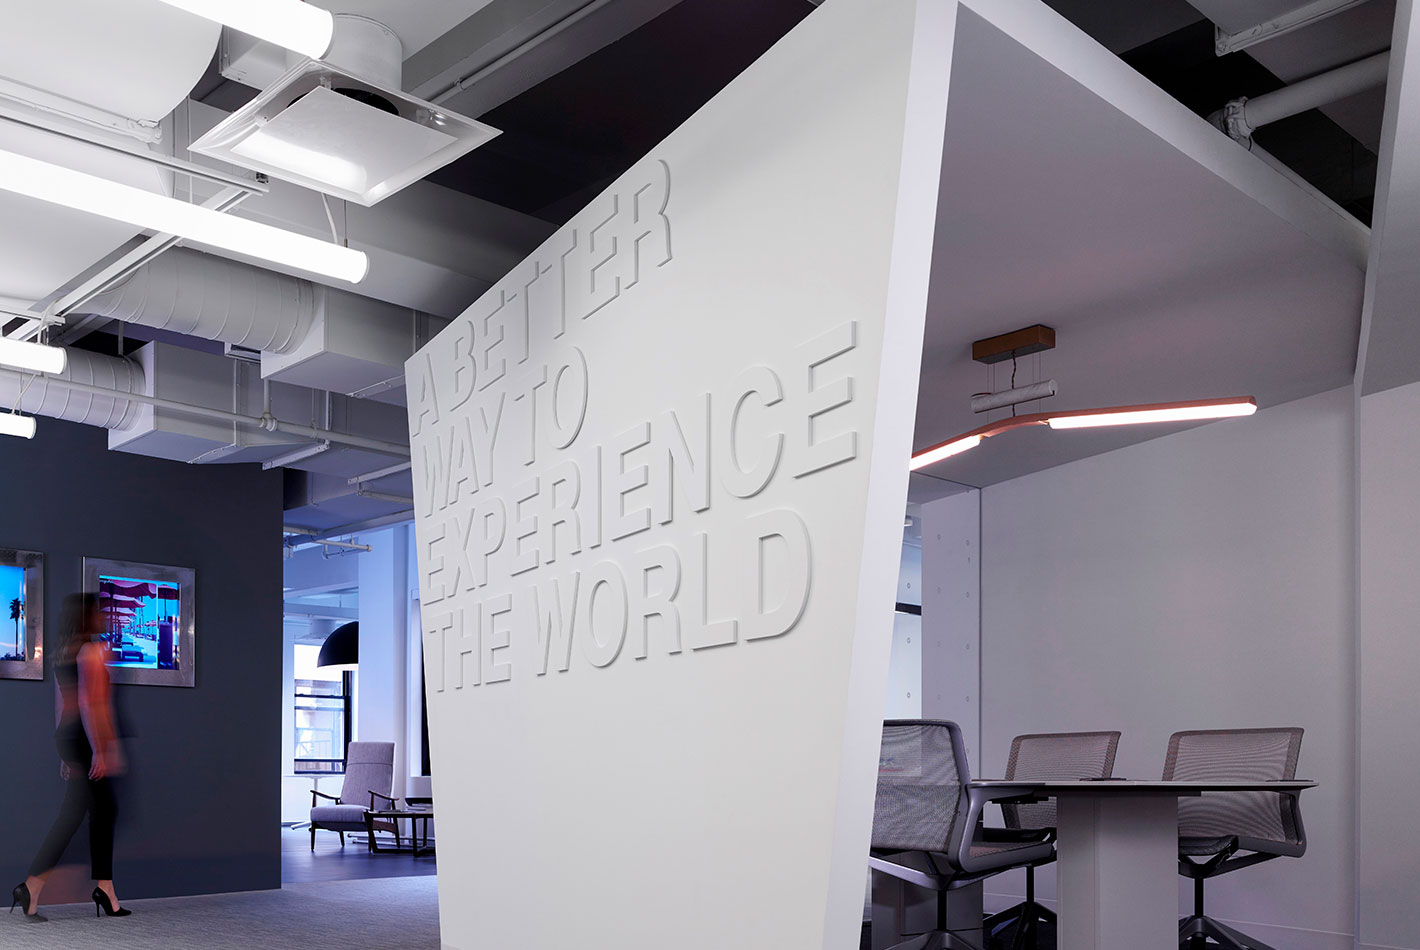 A sheltered conference room at the Starwood Design Studio is covered in brand messaging text